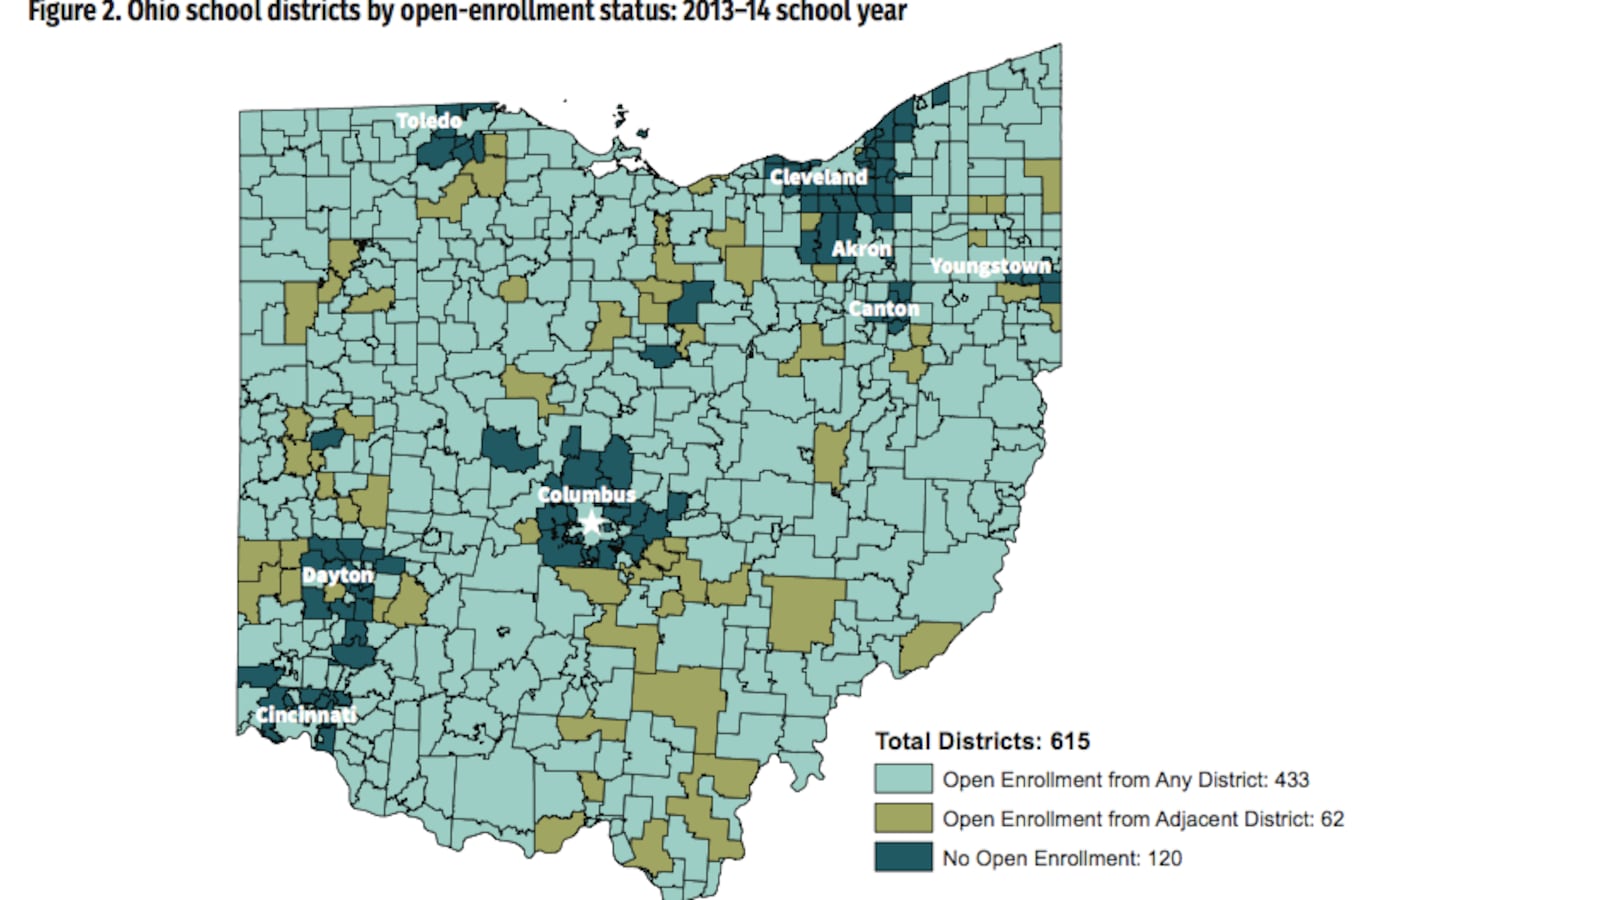 Map of Ohio districts that participate in open enrollment program